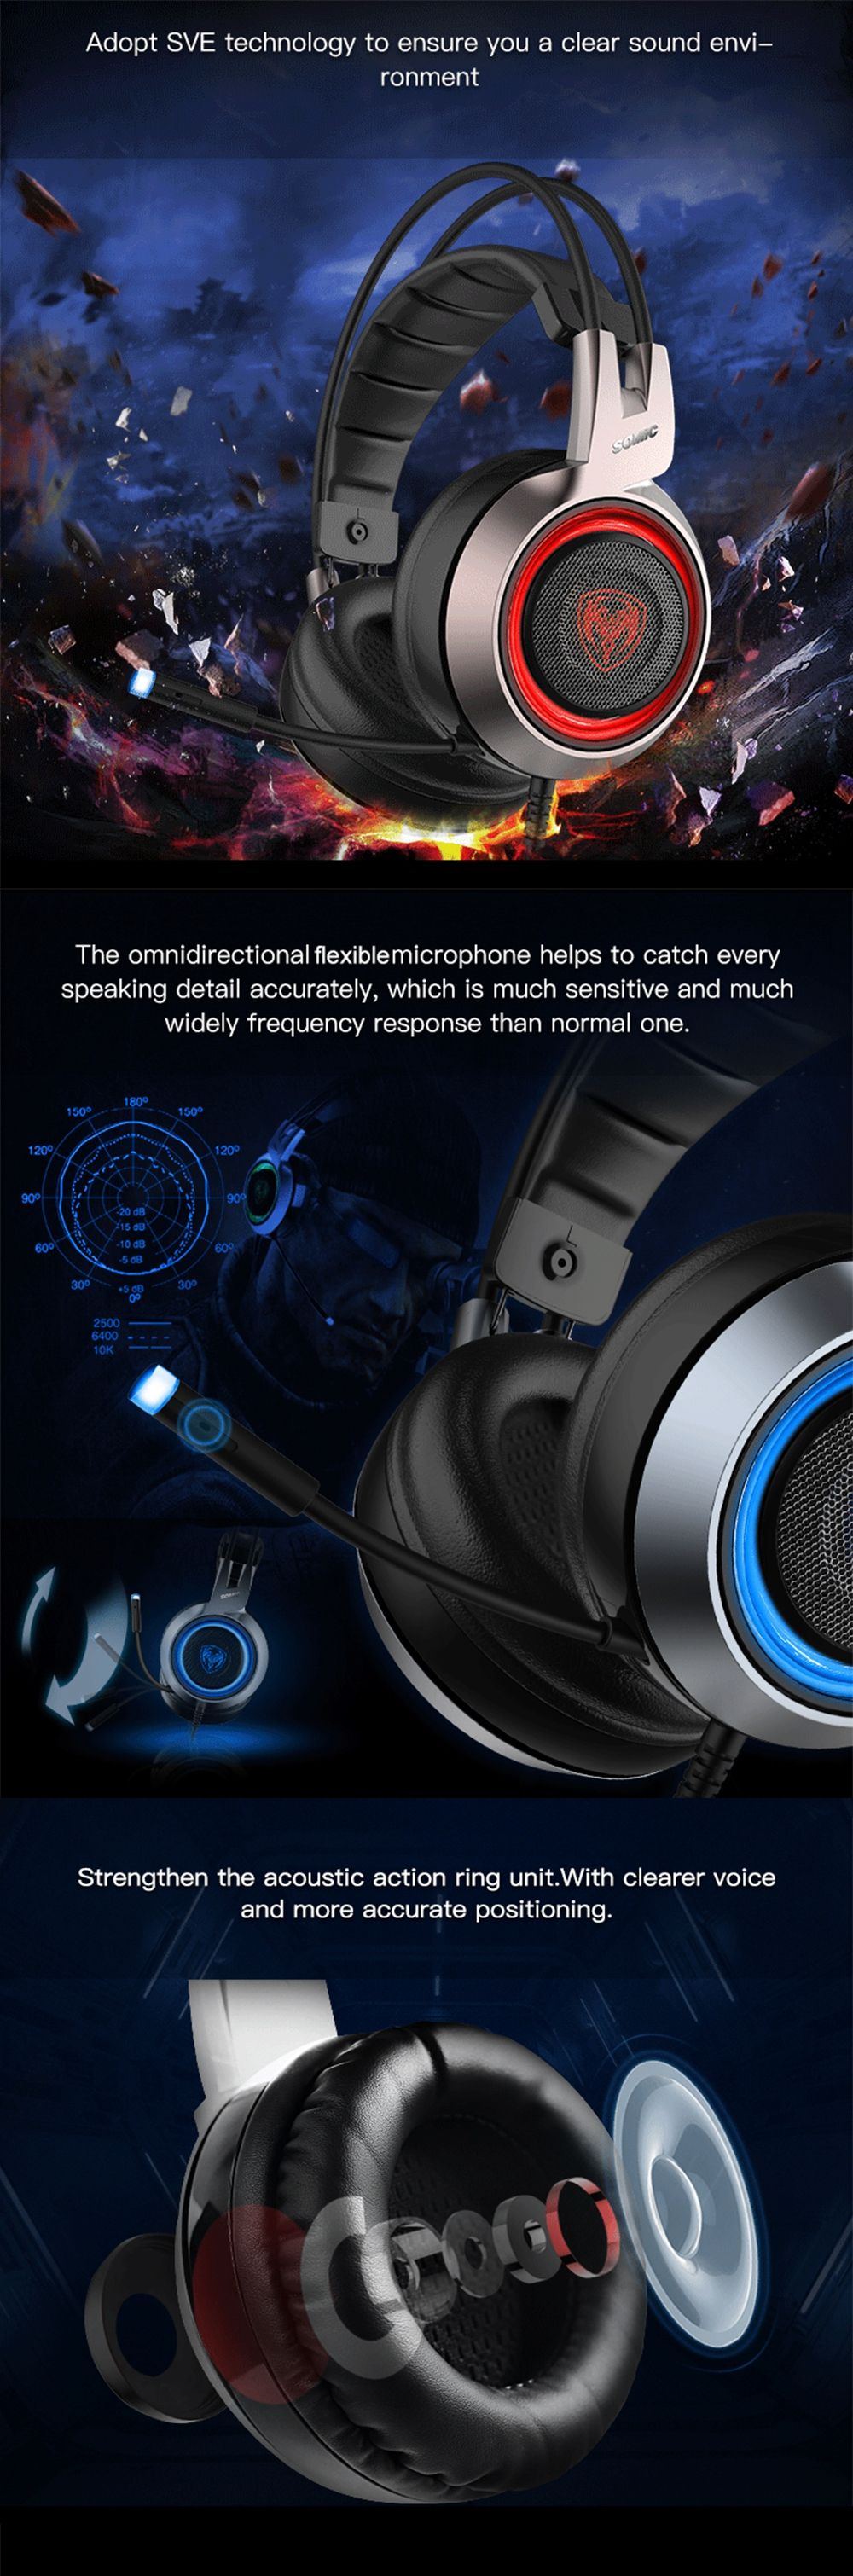 SOMiC-G951-USB-Gaming-Headphone-Breathing-LED-Backlight-with-Three-Colors-Headset-With-Microphone-fo-1560723